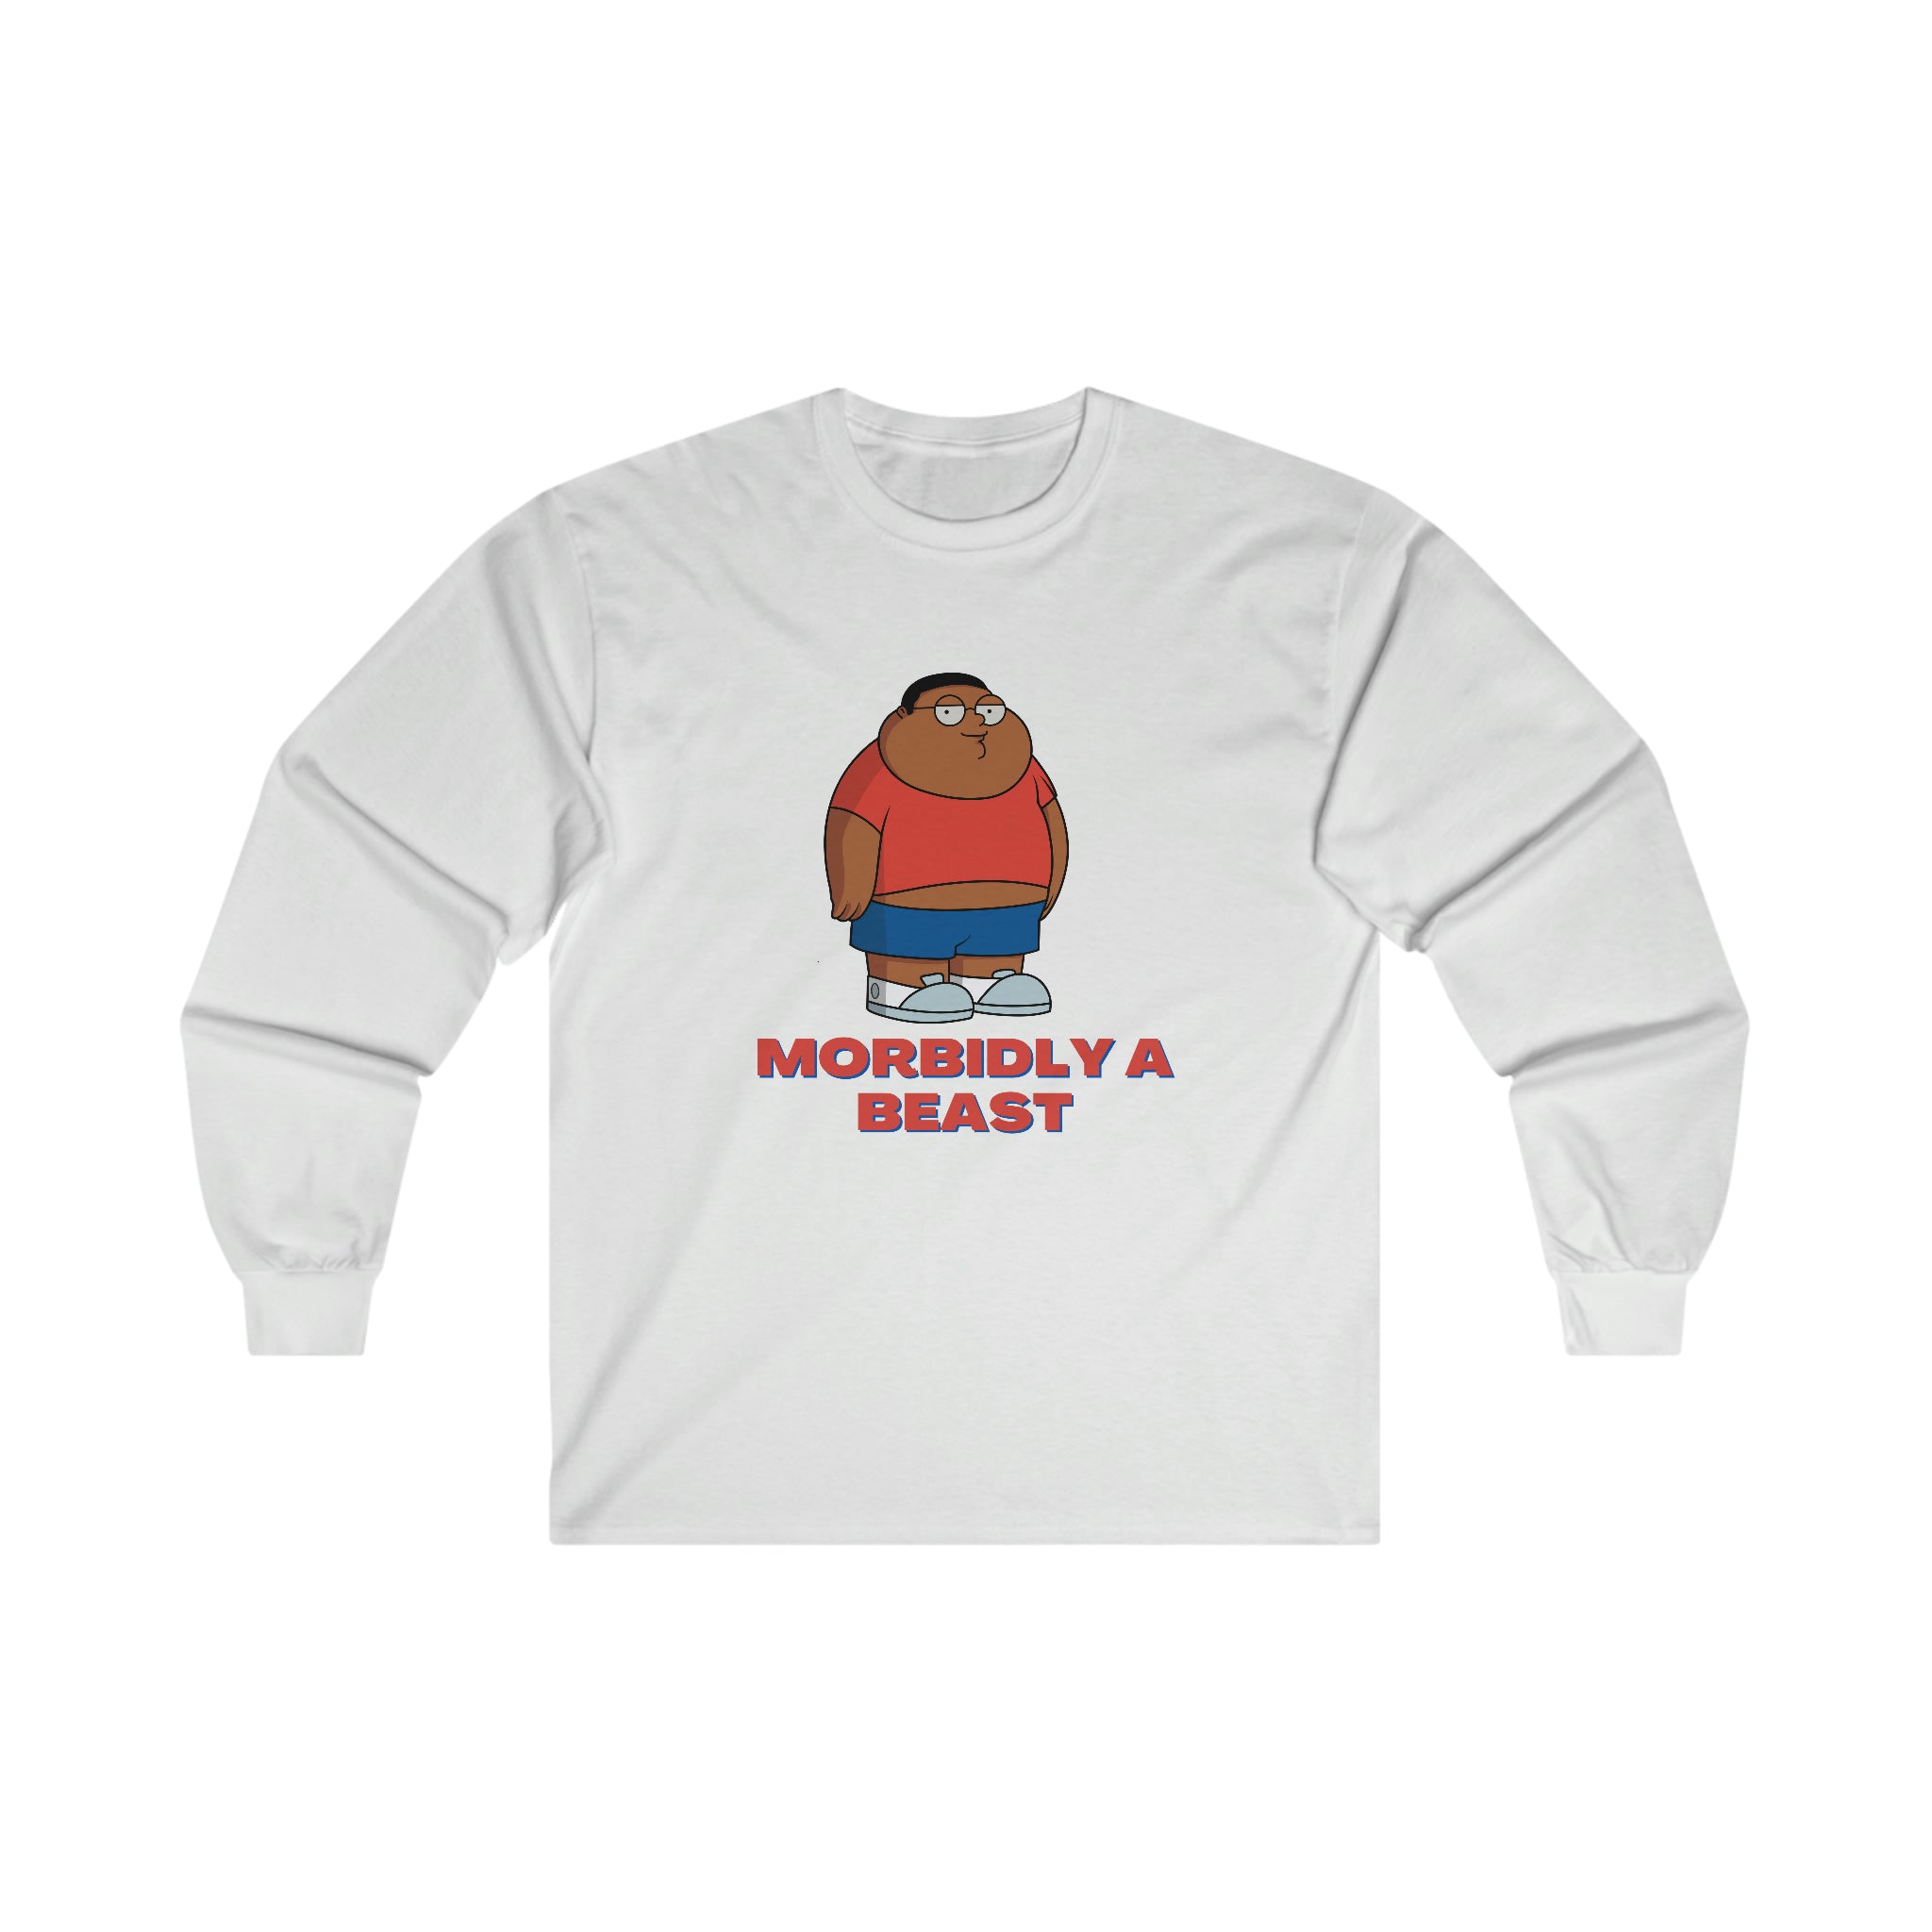 Morbidly a Beast - Ultra Cotton Long Sleeve Tee - All Colors